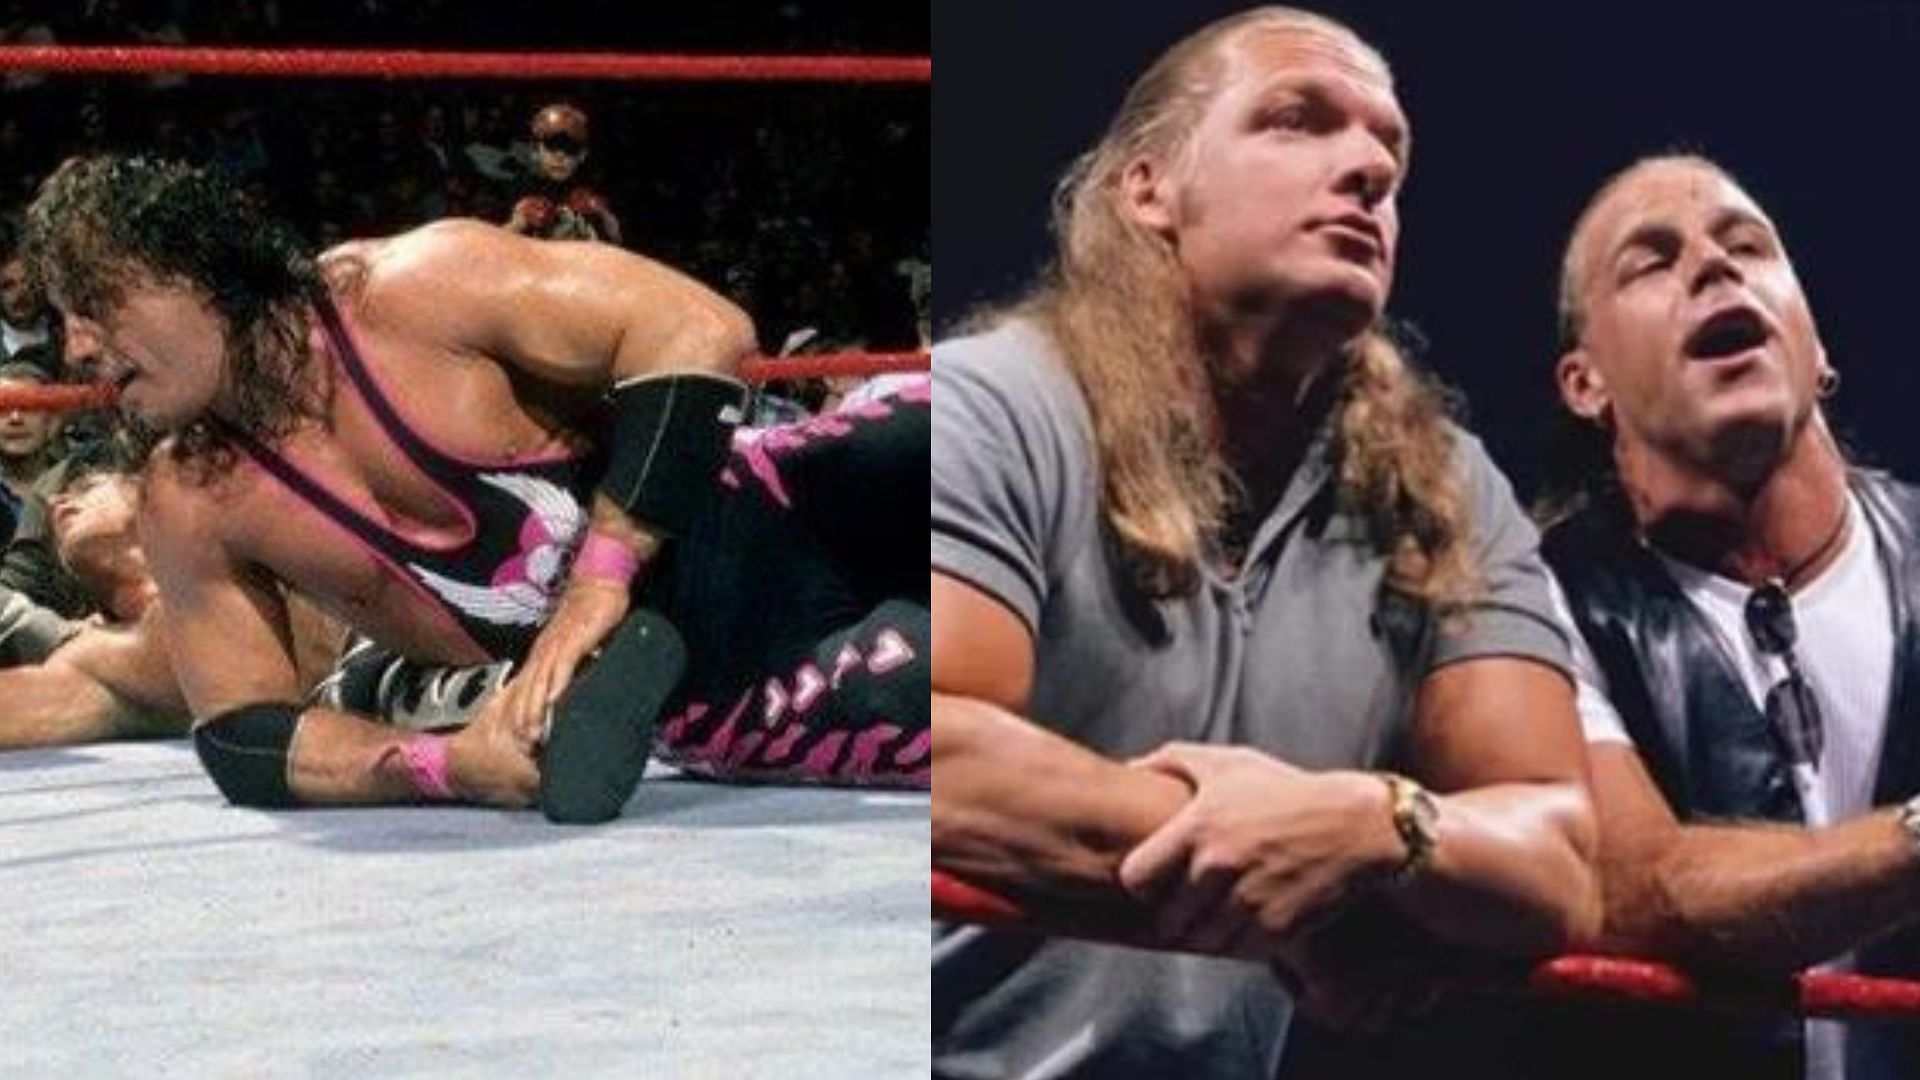 WWE legends Bret Hart, Shawn Michaels, and Triple H